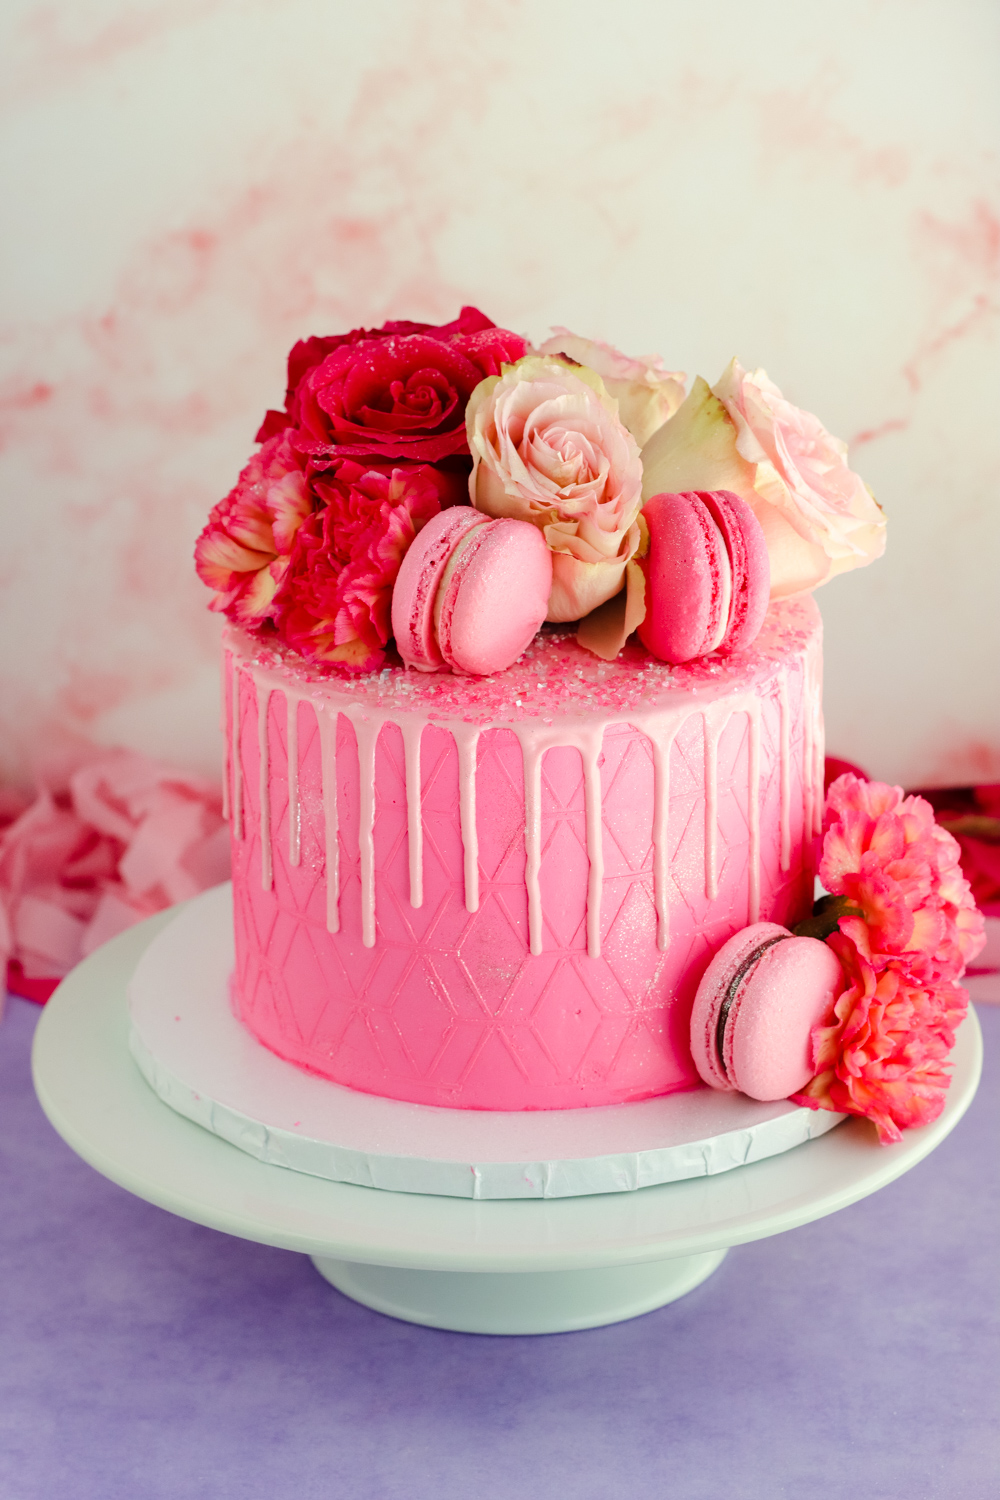 How to make a floral hot pink stencil cake